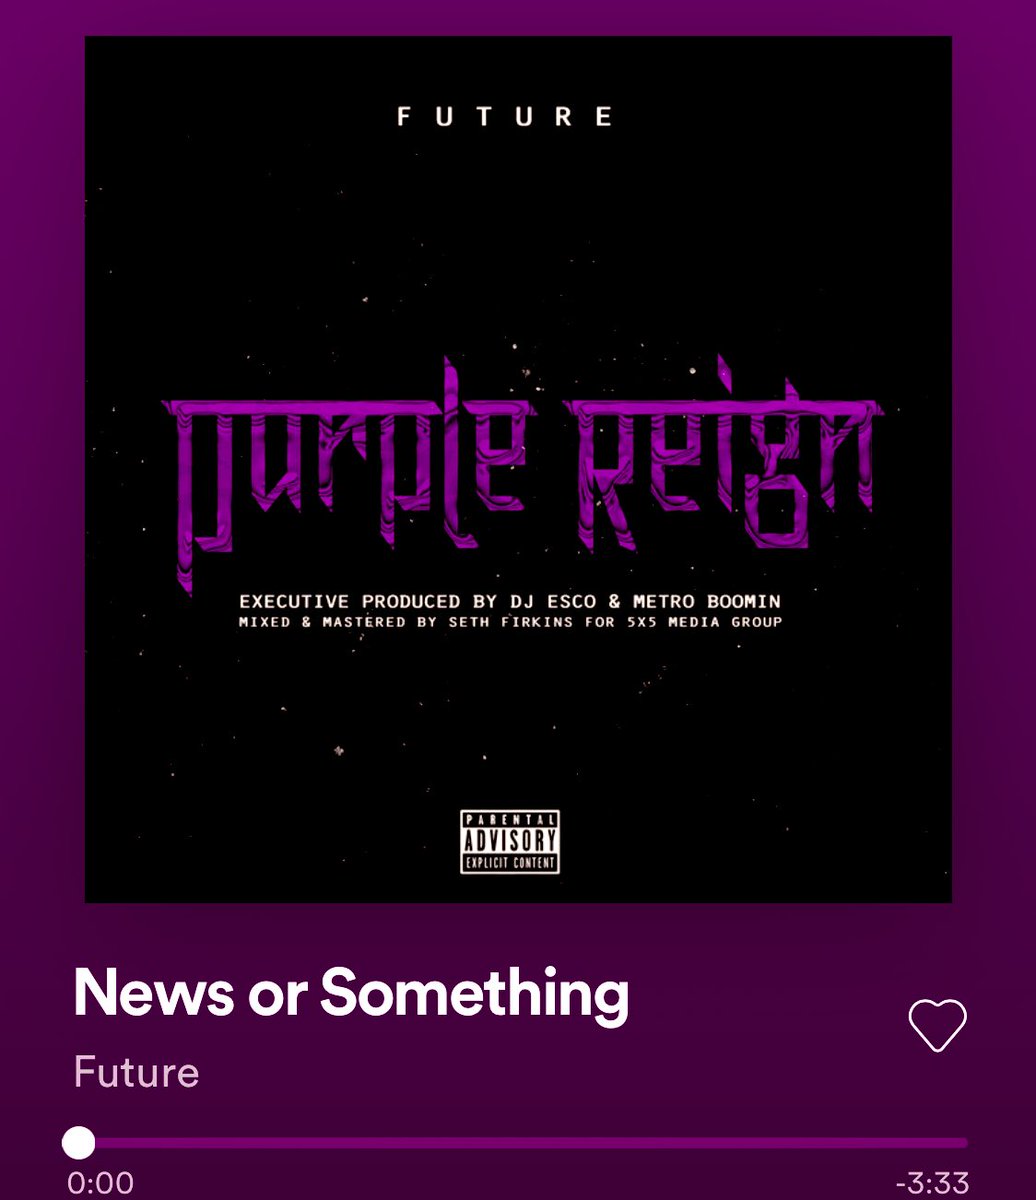 Some Underrated Future Songs Everyone Should Check Out• 4 Da Gang• Benz Friendz• Married To The Game• My Savages• News Or Something• Maybach• XanaX Damage What’s another underrated Future song that we might have missed?